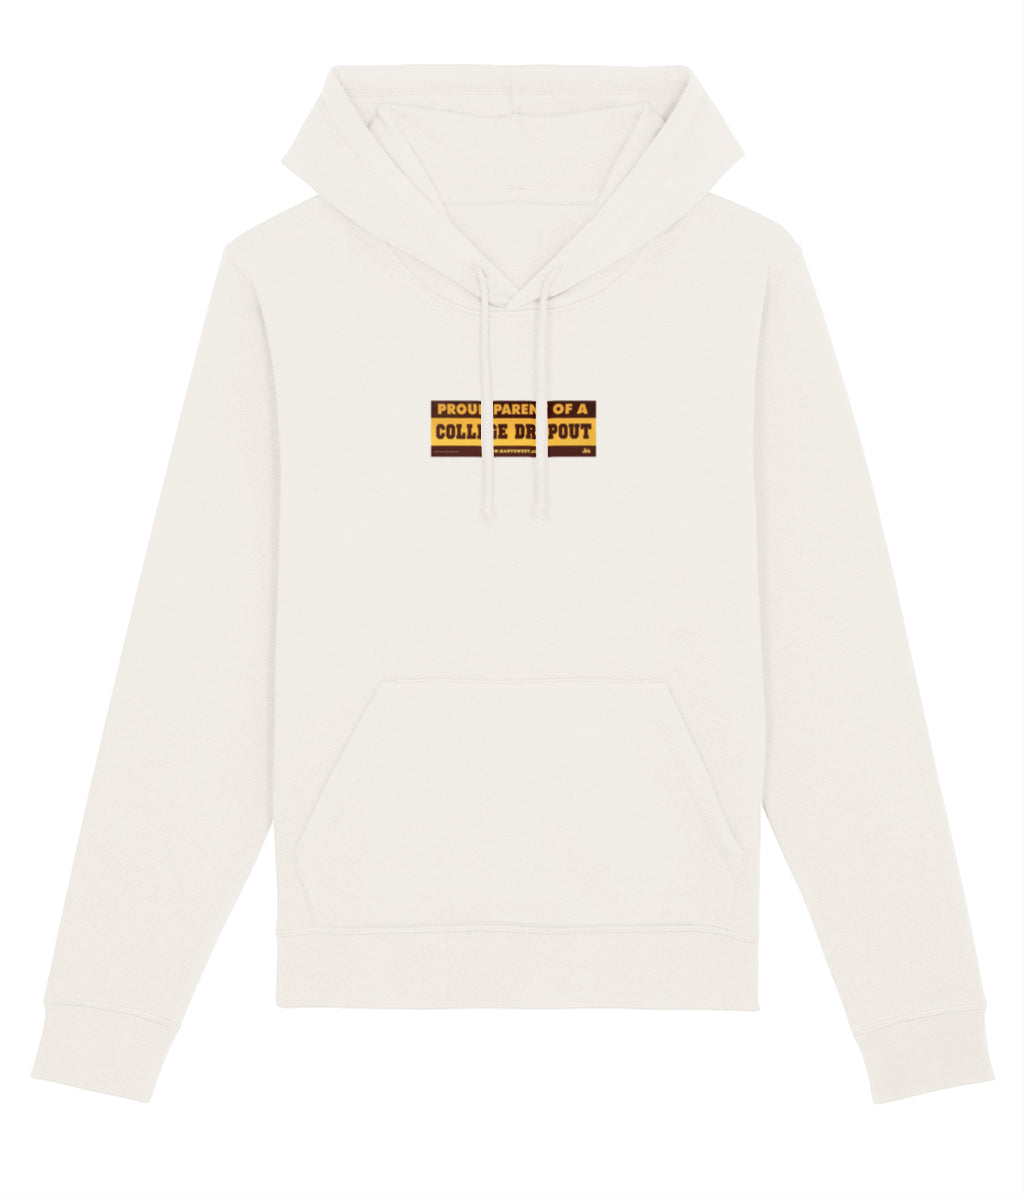 The Proud Parent Hoody Hoody Greazy Tees XS Off White Oversized